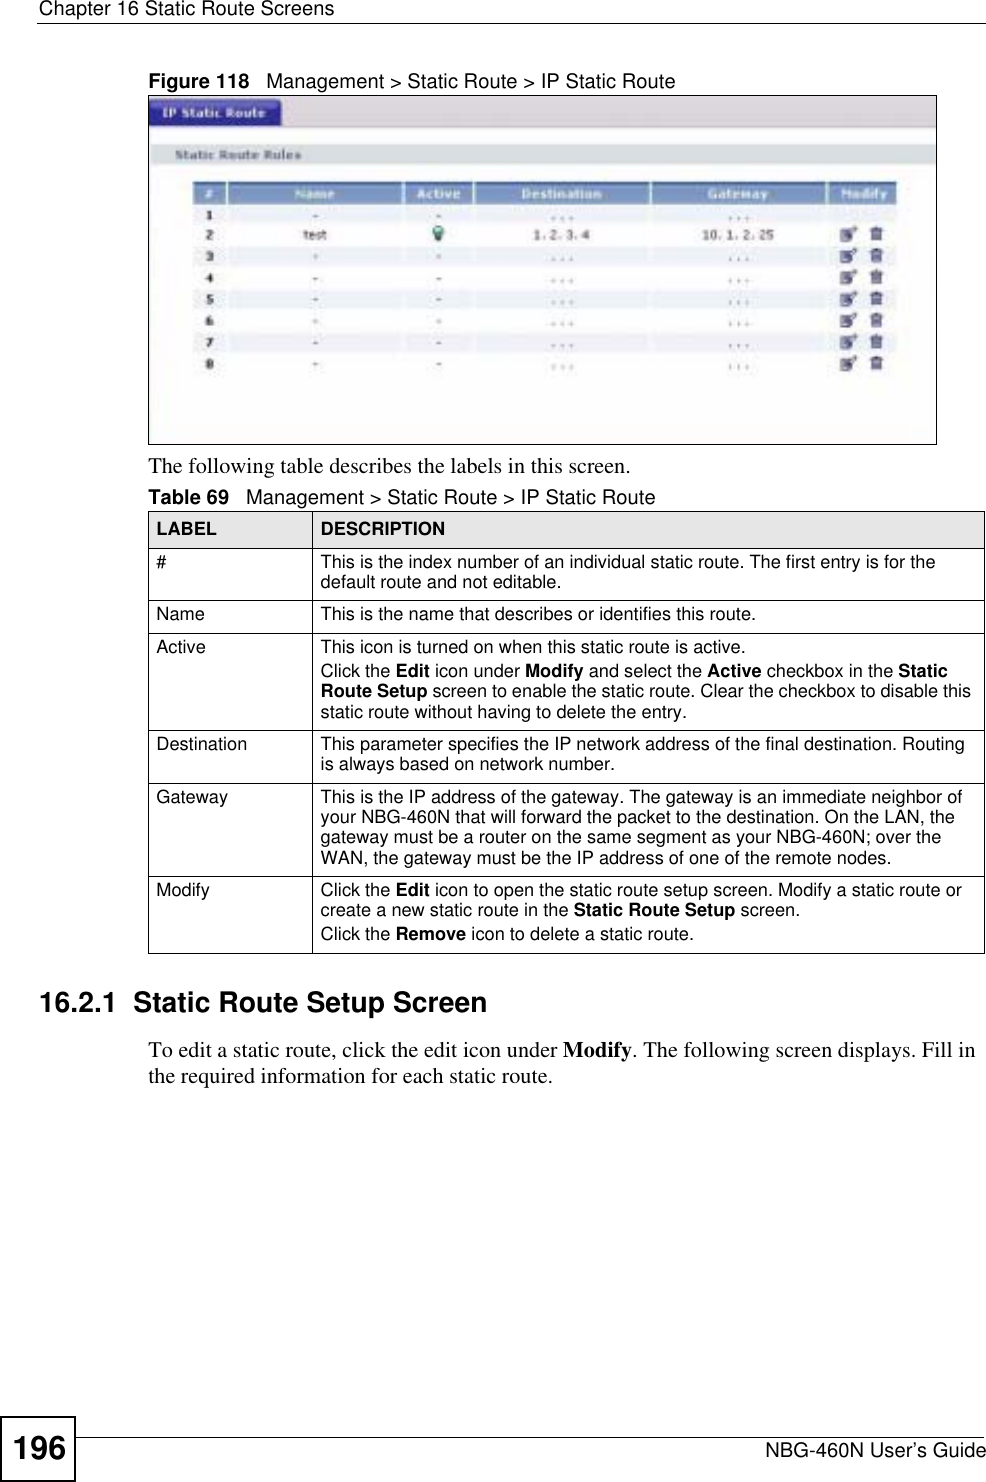 Chapter 16 Static Route ScreensNBG-460N User’s Guide196Figure 118   Management &gt; Static Route &gt; IP Static RouteThe following table describes the labels in this screen.16.2.1  Static Route Setup Screen   To edit a static route, click the edit icon under Modify. The following screen displays. Fill in the required information for each static route.Table 69   Management &gt; Static Route &gt; IP Static RouteLABEL DESCRIPTION#This is the index number of an individual static route. The first entry is for the default route and not editable.Name This is the name that describes or identifies this route. Active This icon is turned on when this static route is active.Click the Edit icon under Modify and select the Active checkbox in the StaticRoute Setup screen to enable the static route. Clear the checkbox to disable this static route without having to delete the entry.Destination This parameter specifies the IP network address of the final destination. Routing is always based on network number. Gateway This is the IP address of the gateway. The gateway is an immediate neighbor of your NBG-460N that will forward the packet to the destination. On the LAN, the gateway must be a router on the same segment as your NBG-460N; over the WAN, the gateway must be the IP address of one of the remote nodes.Modify Click the Edit icon to open the static route setup screen. Modify a static route or create a new static route in the Static Route Setup screen.Click the Remove icon to delete a static route.